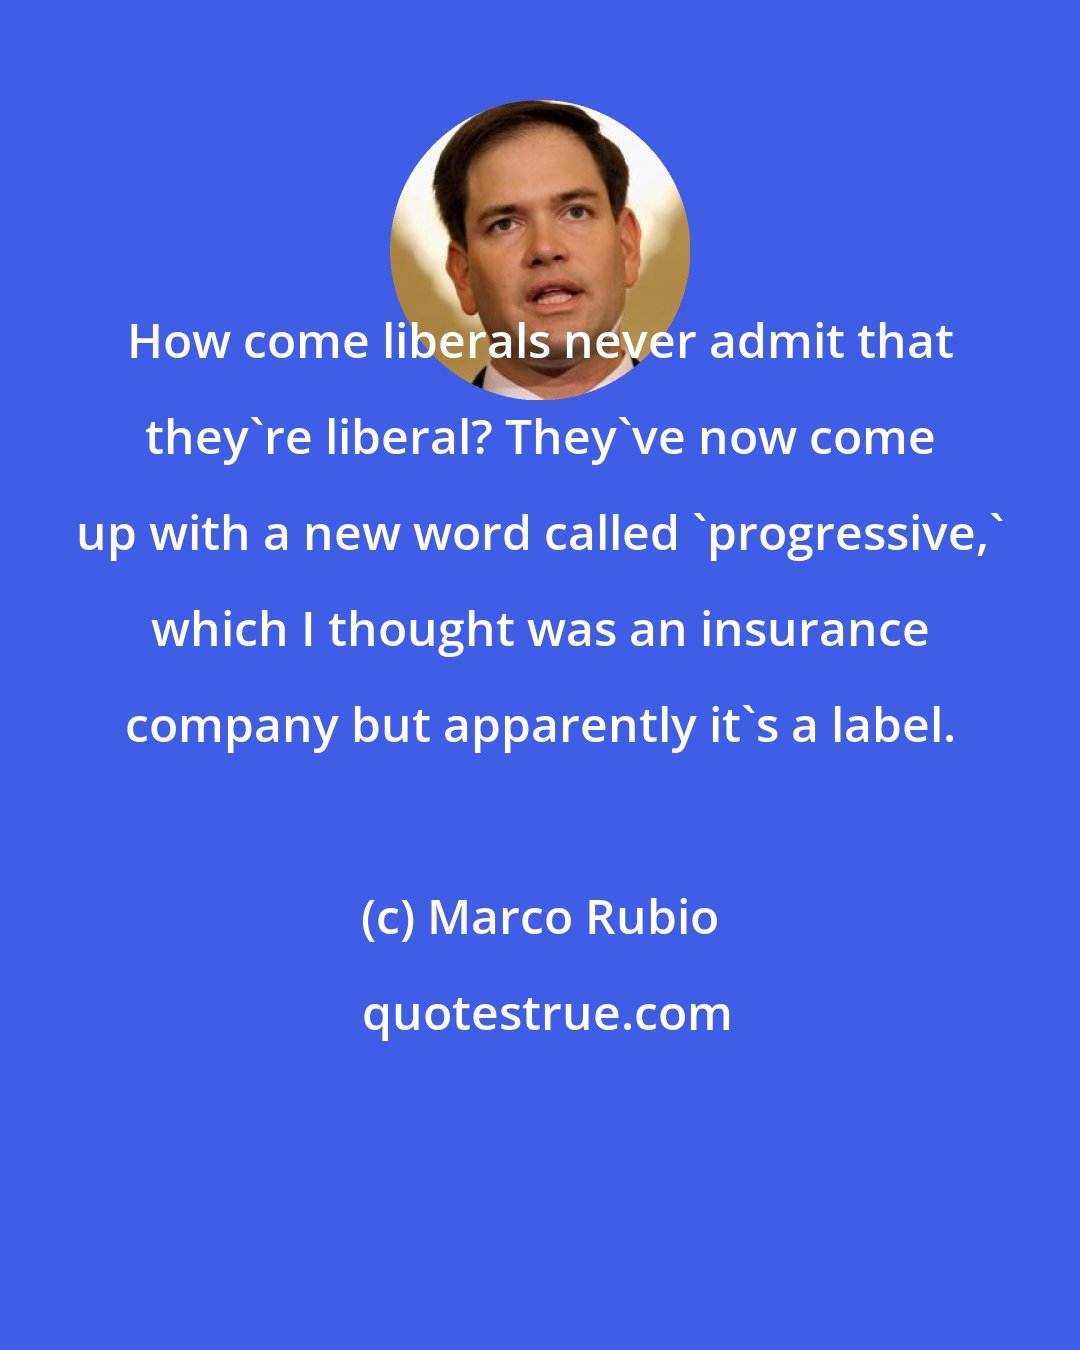 Marco Rubio: How come liberals never admit that they're liberal? They've now come up with a new word called 'progressive,' which I thought was an insurance company but apparently it's a label.